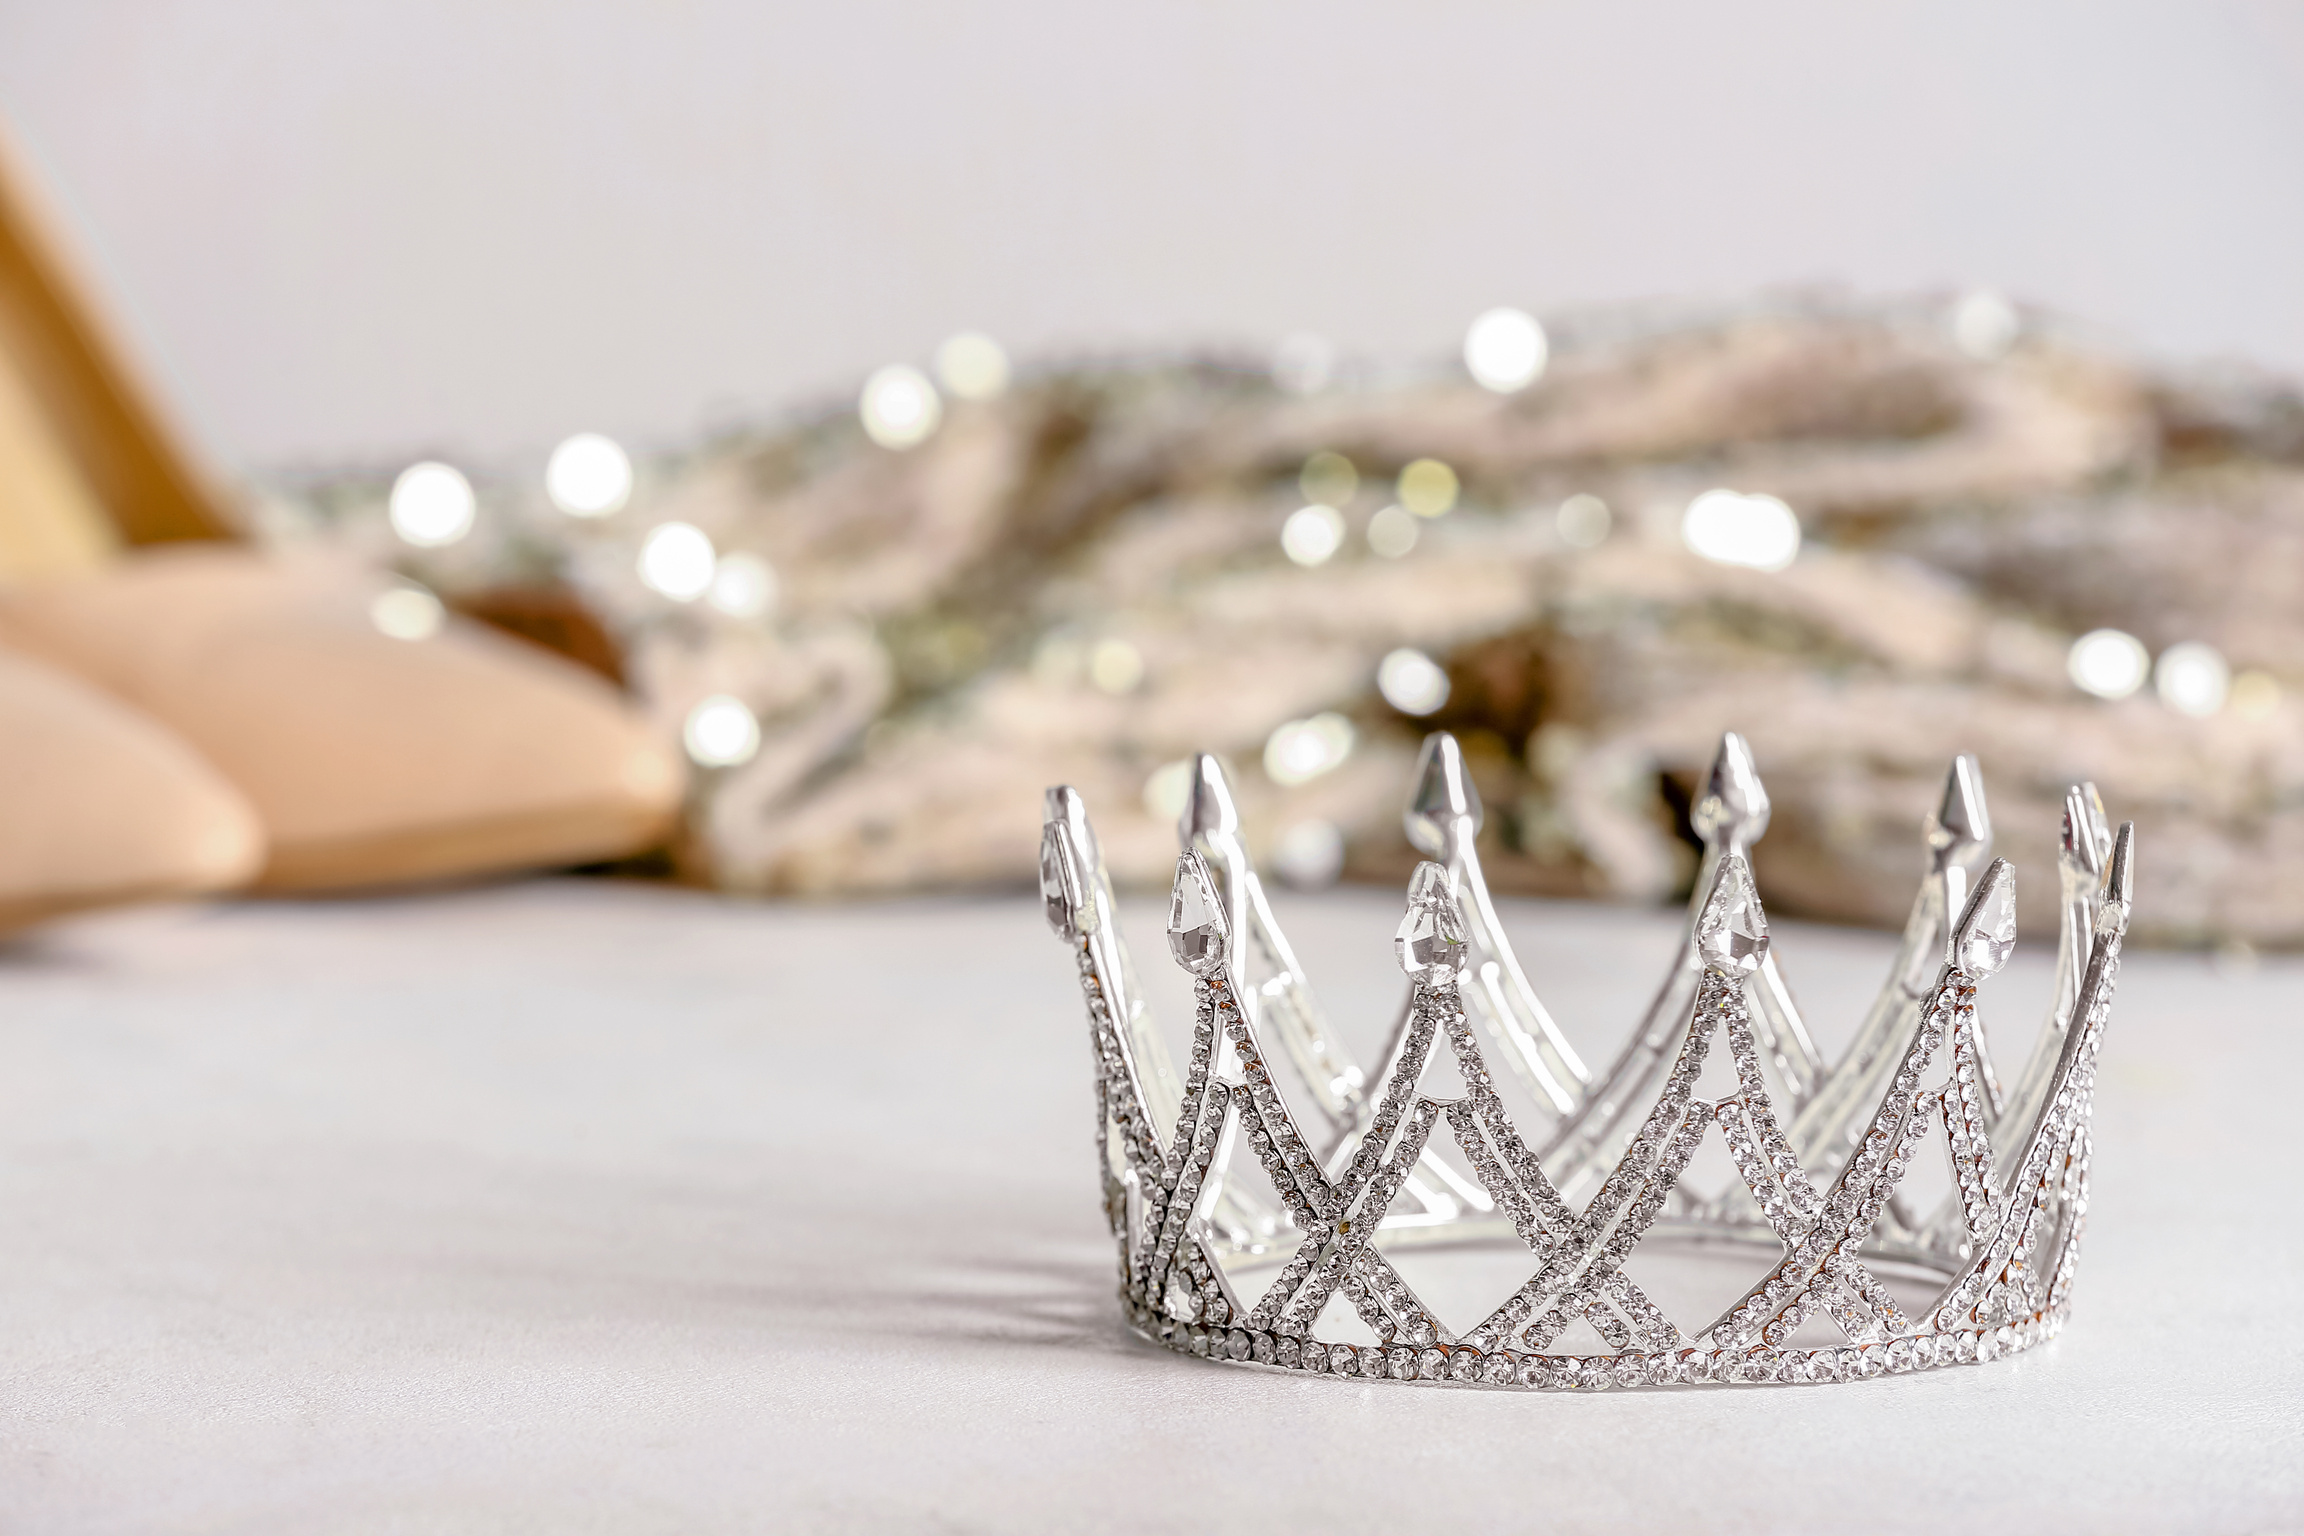 Beautiful Crown on White Table, Closeup. Prom Concept